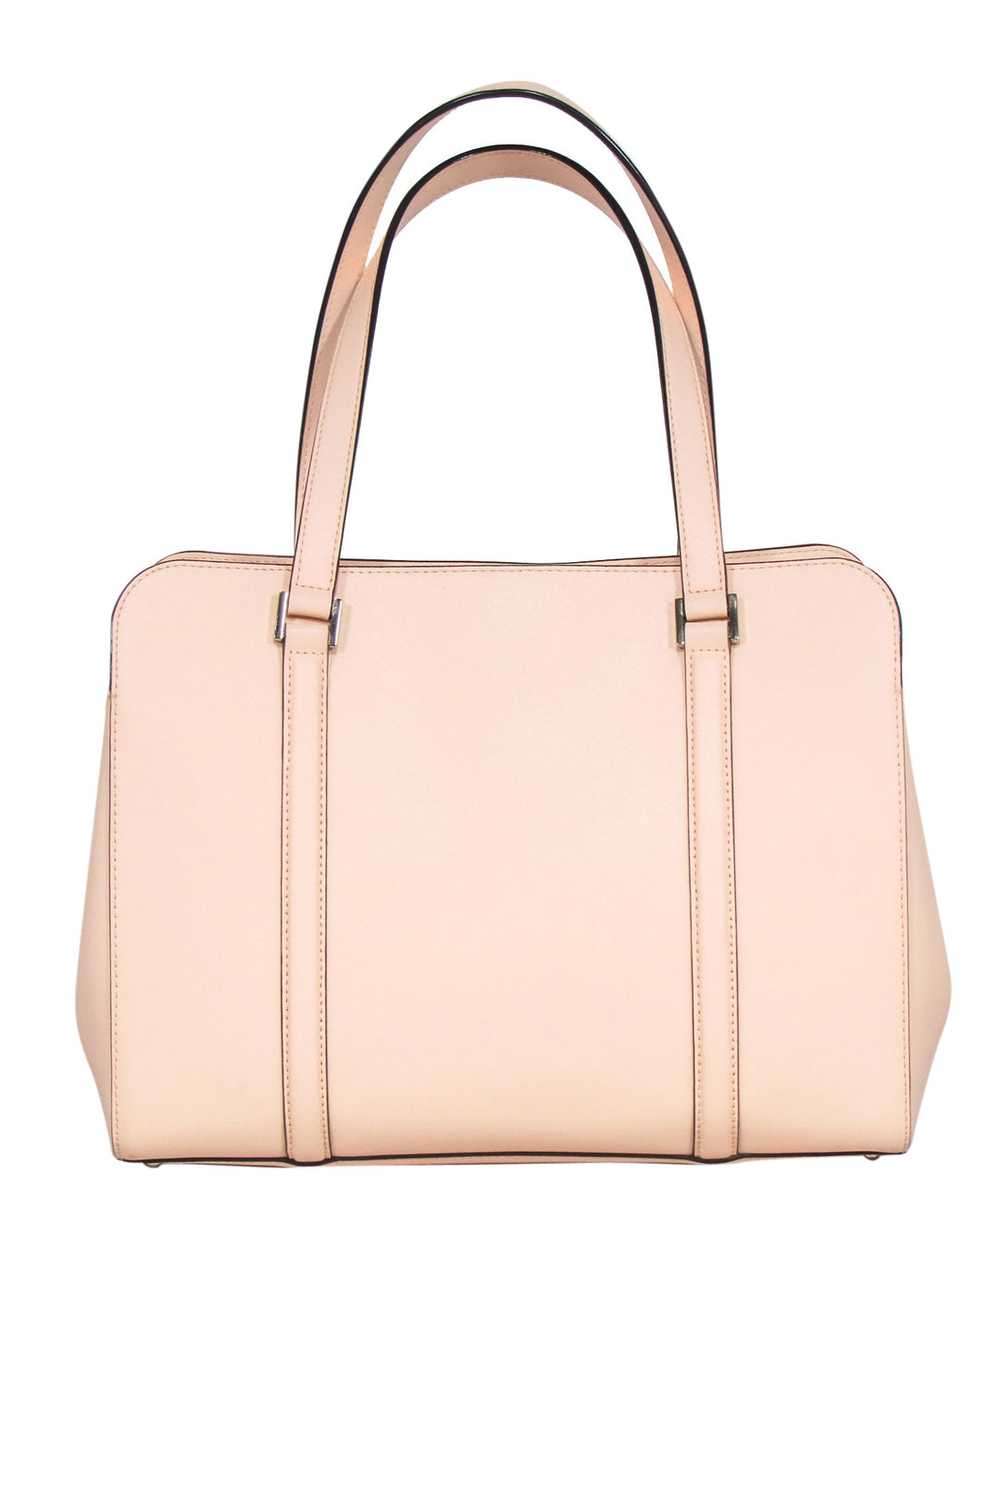 Kate Spade - Peach Pink Textured Leather "Miles" … - image 3